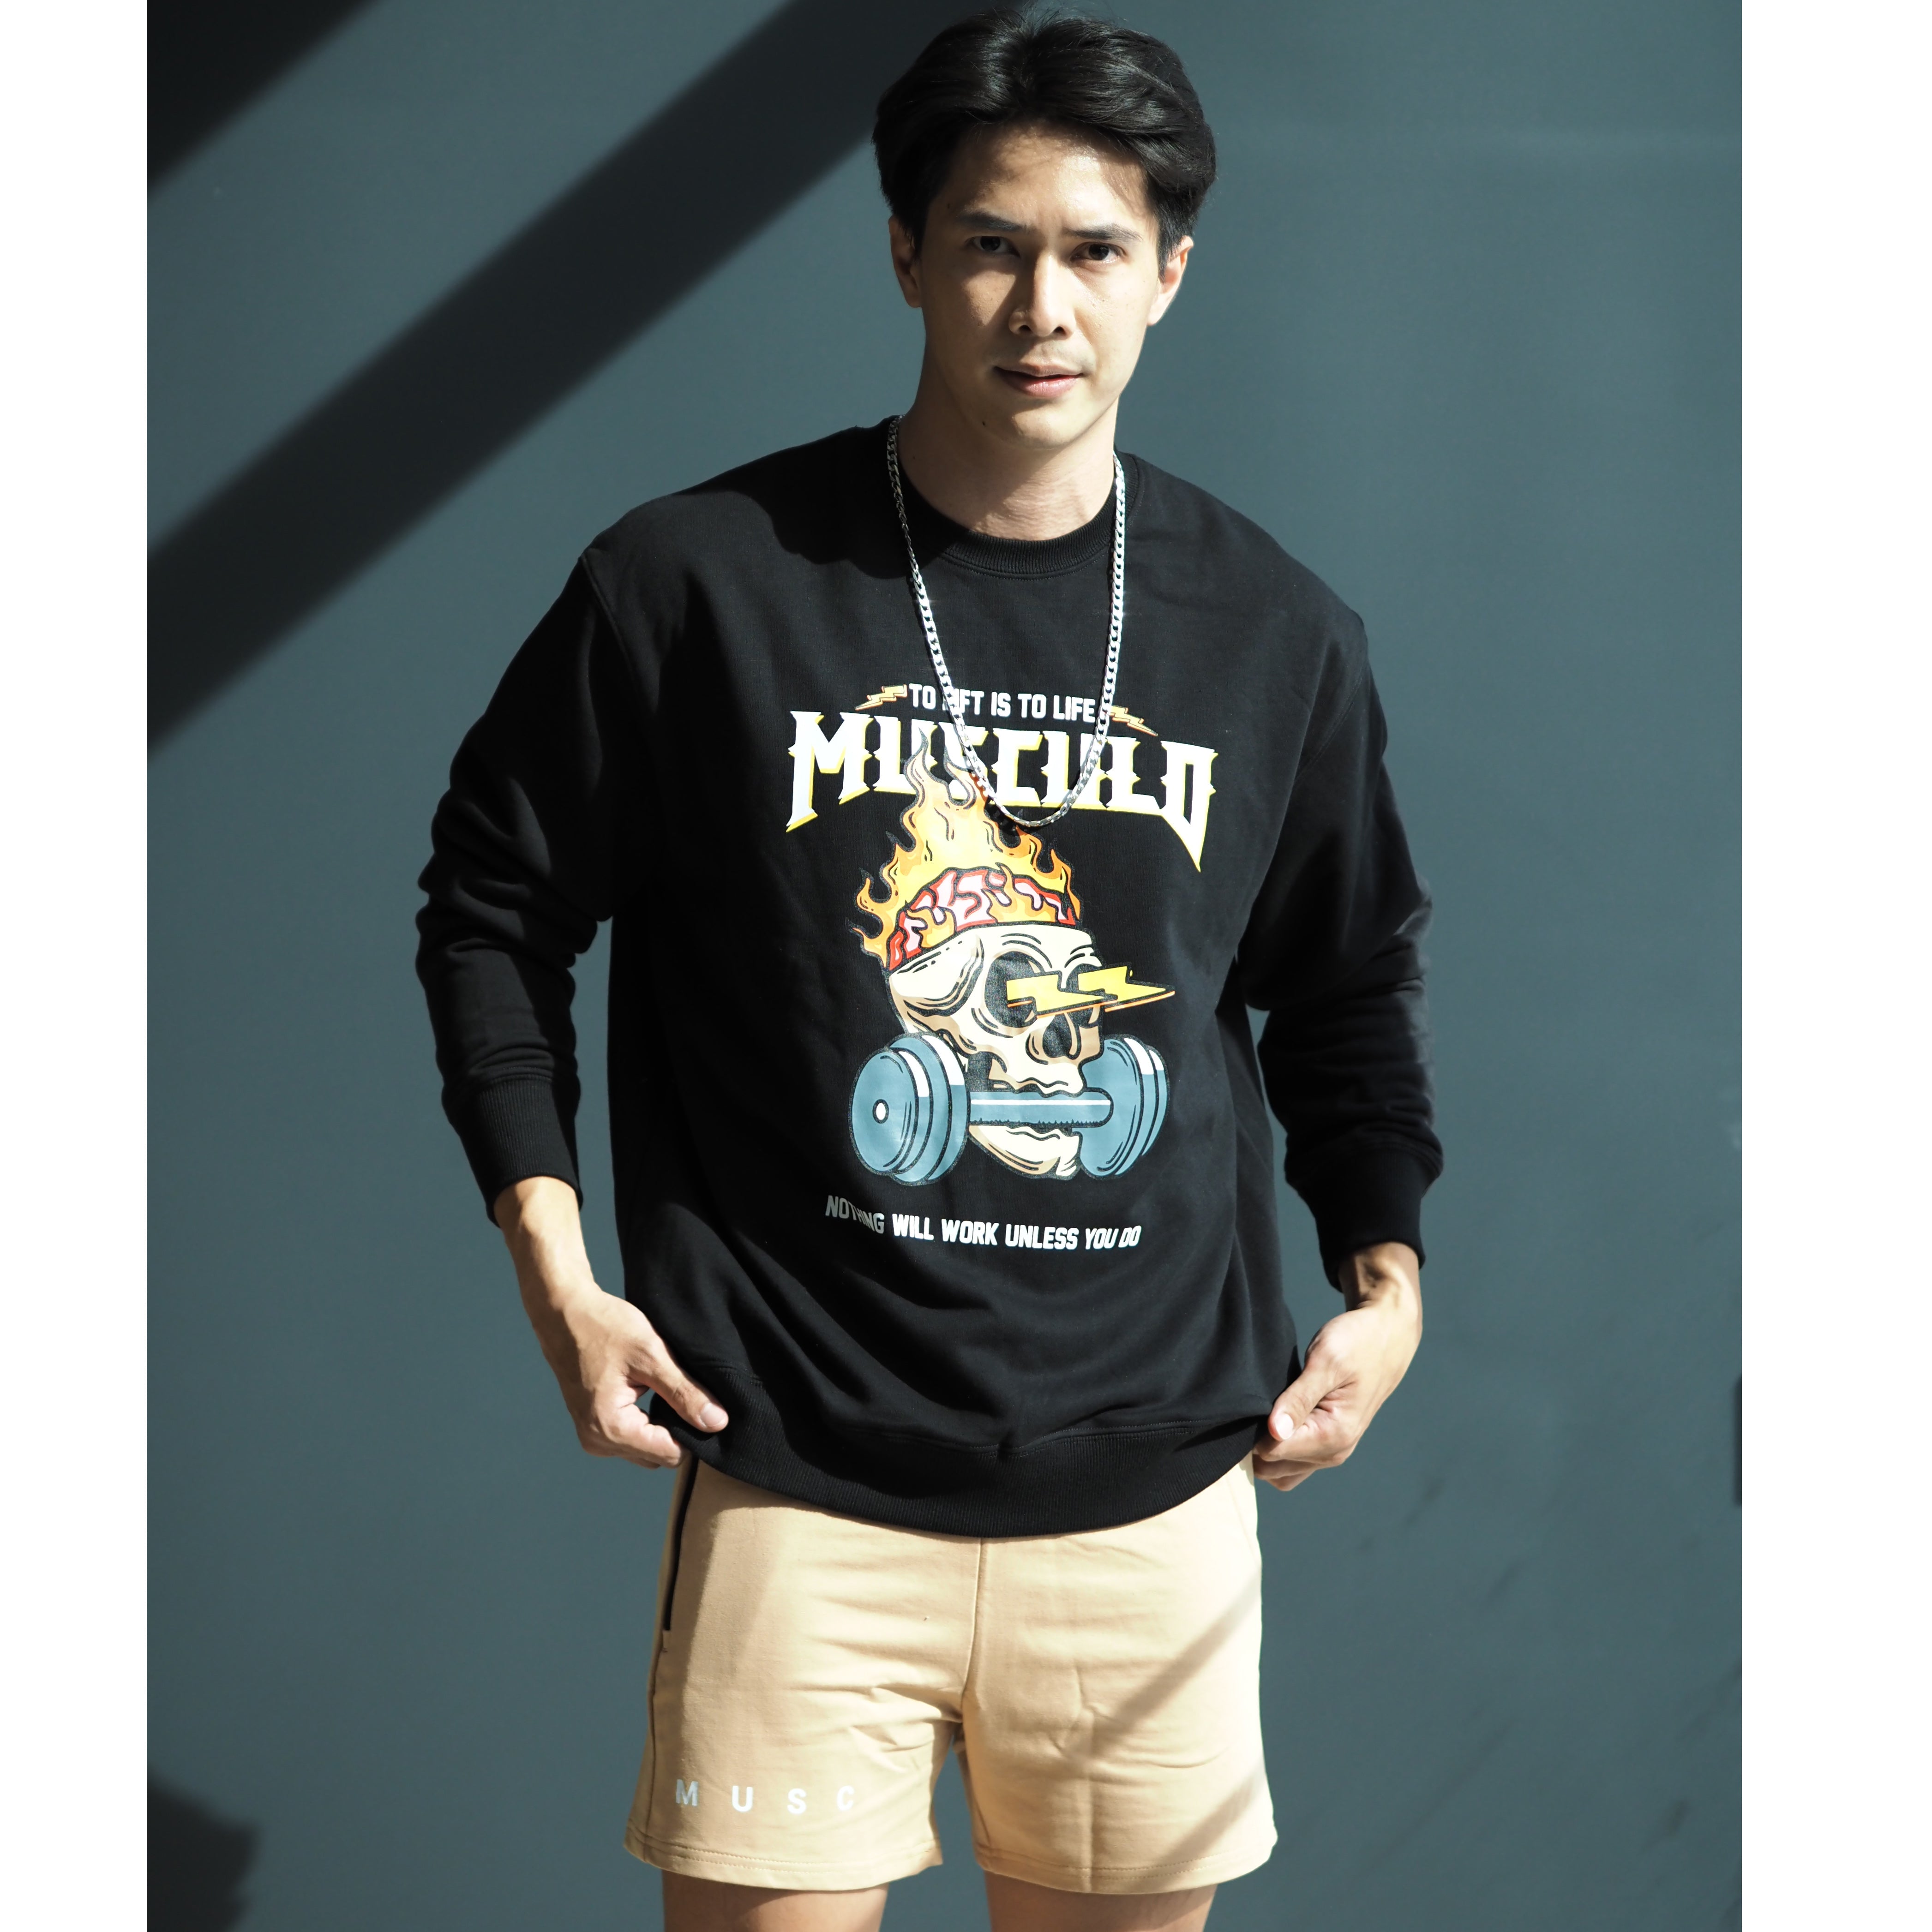 Musculo terry sweater : Frying skull printed - Black